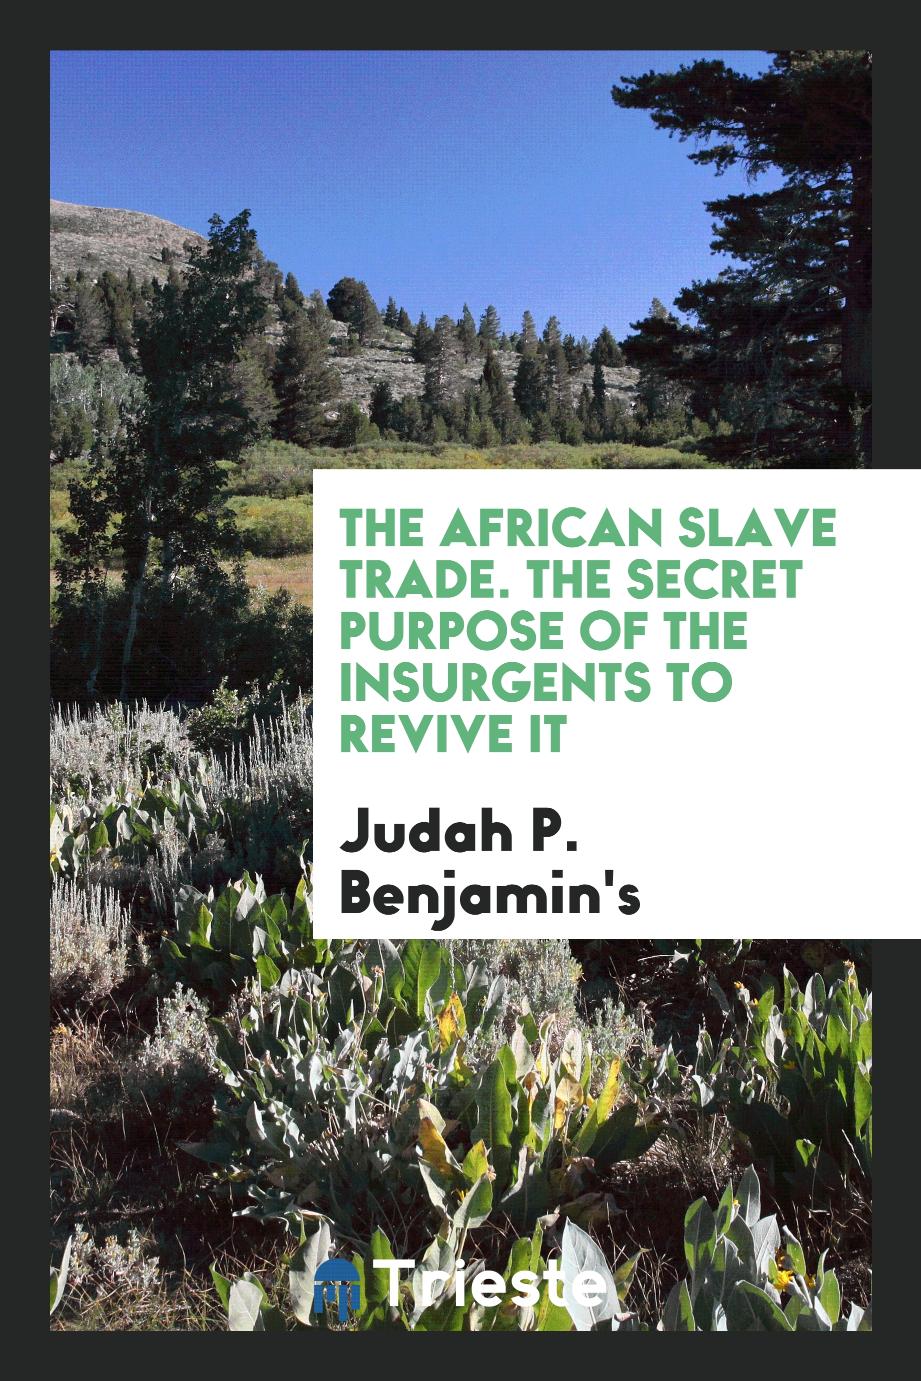 The African Slave Trade. The Secret Purpose of the Insurgents to Revive It